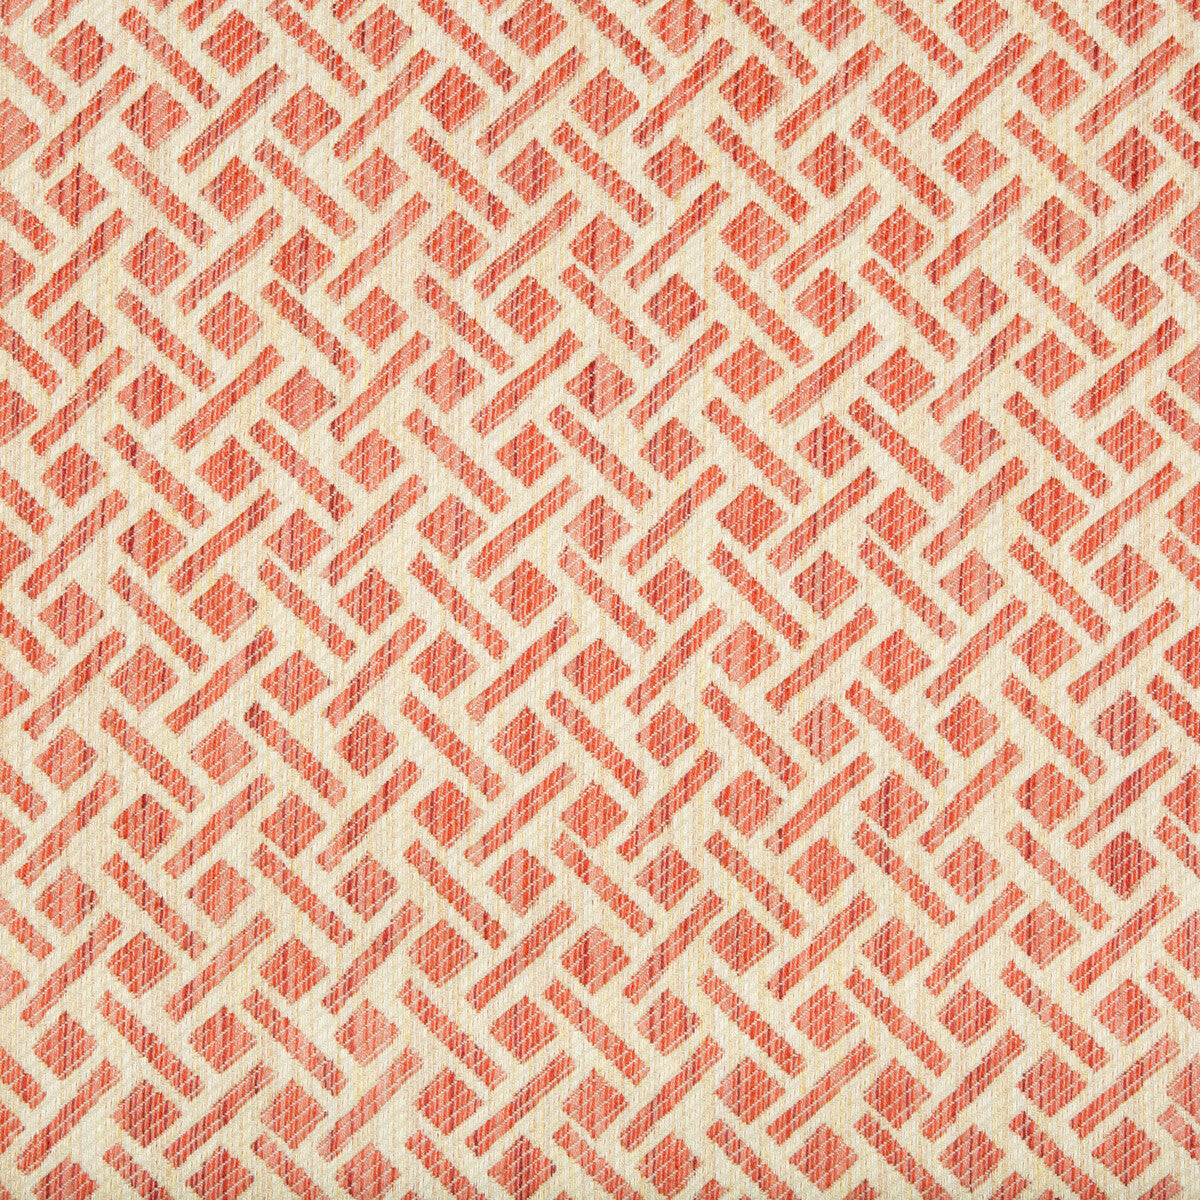 Comte Strie fabric in rose color - pattern 8017141.717.0 - by Brunschwig &amp; Fils in the Baronet collection